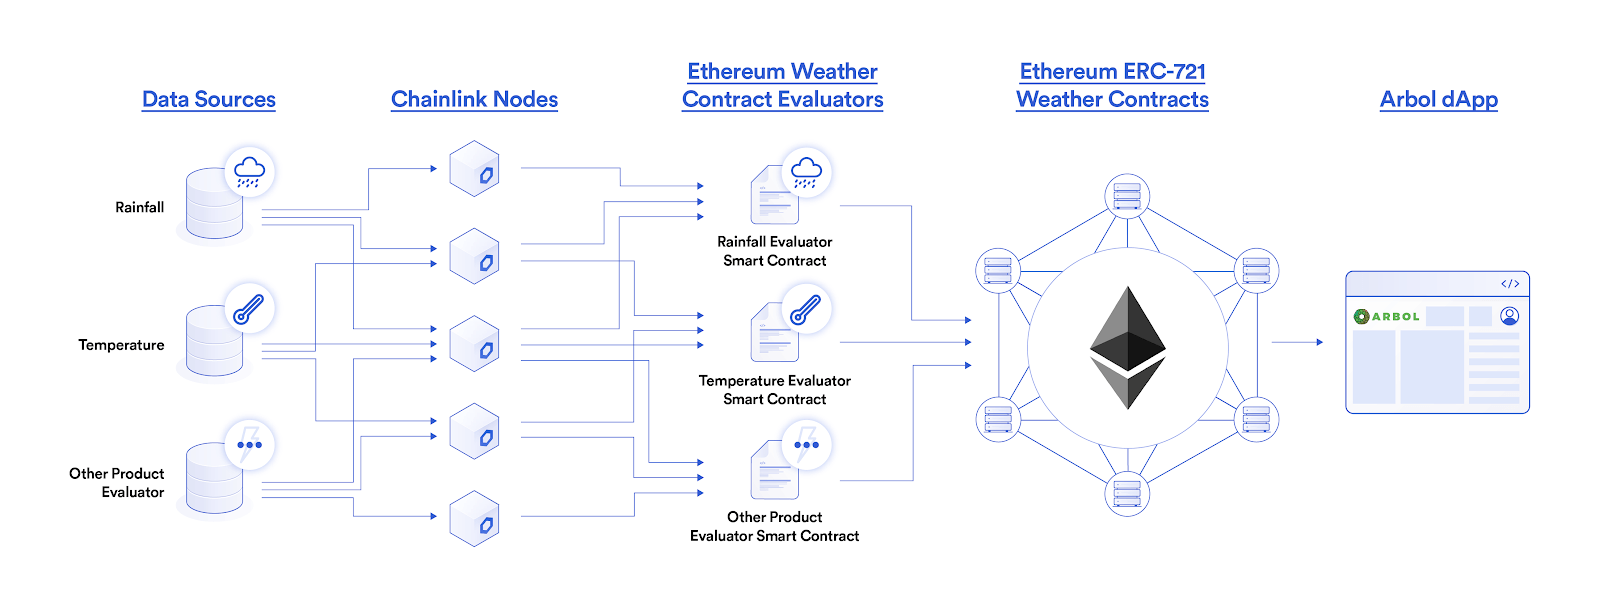 Arbol uses Chainlink oracles to fetch weather data used to execute parametric crop insurance contracts